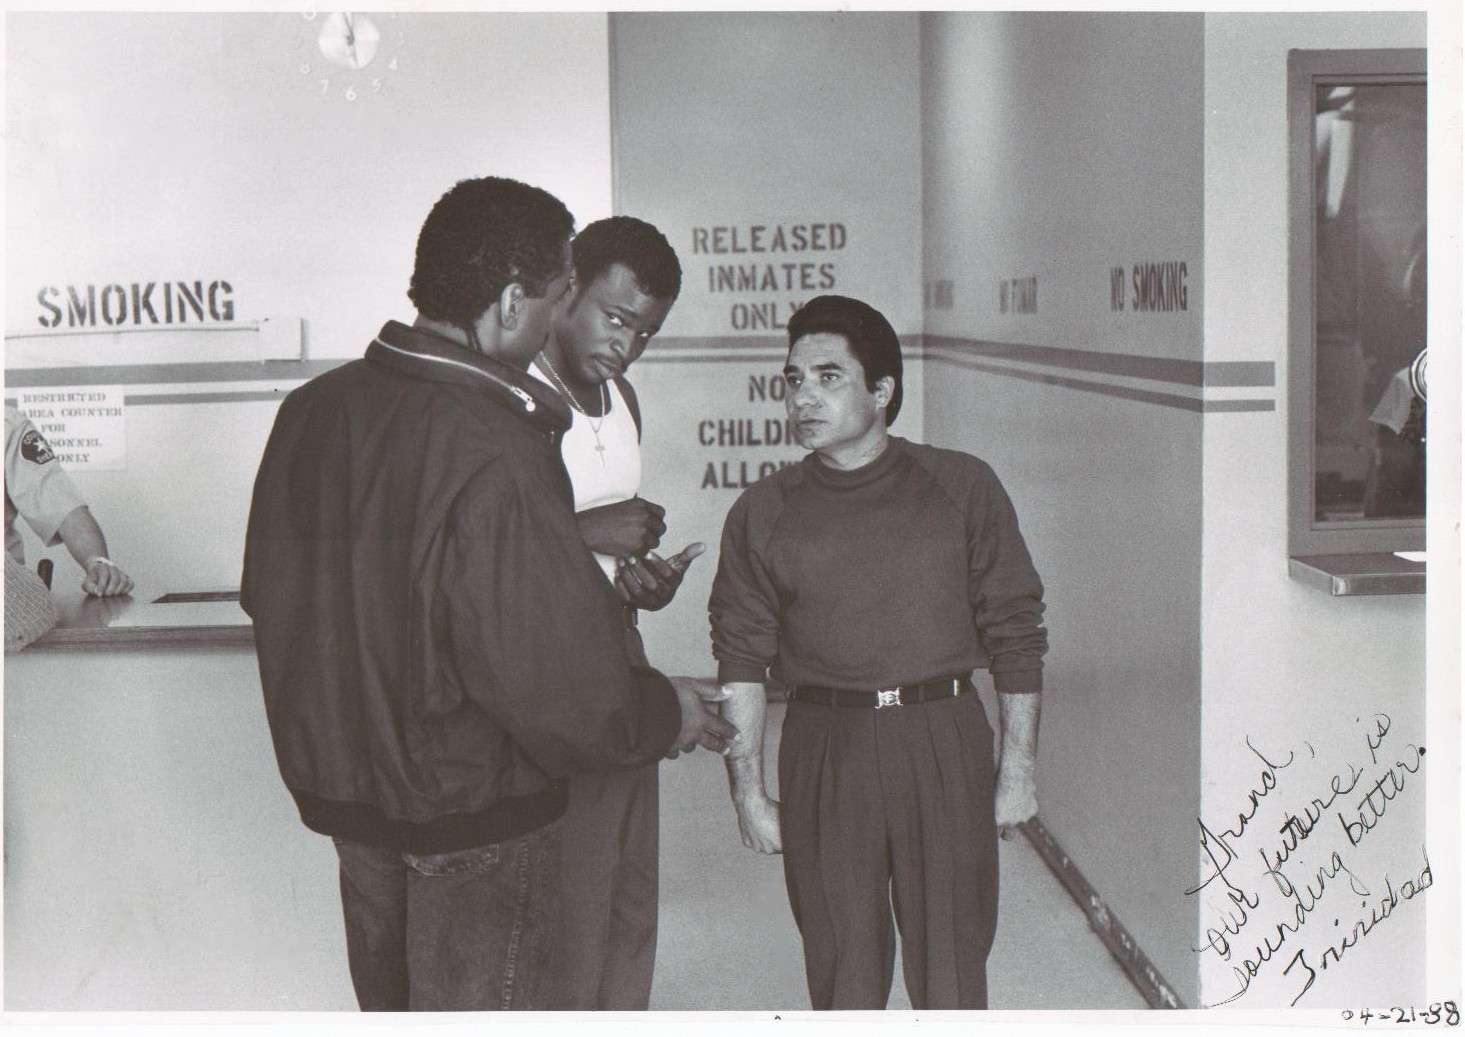 Shortly after Trinidad Silva signed this souvenir image for COLORS co-star Grand L. Bush, Silva was tragically killed by a drunk driver. This photo was taken while the two actors were on location at the LA County Jail. They were close friends.